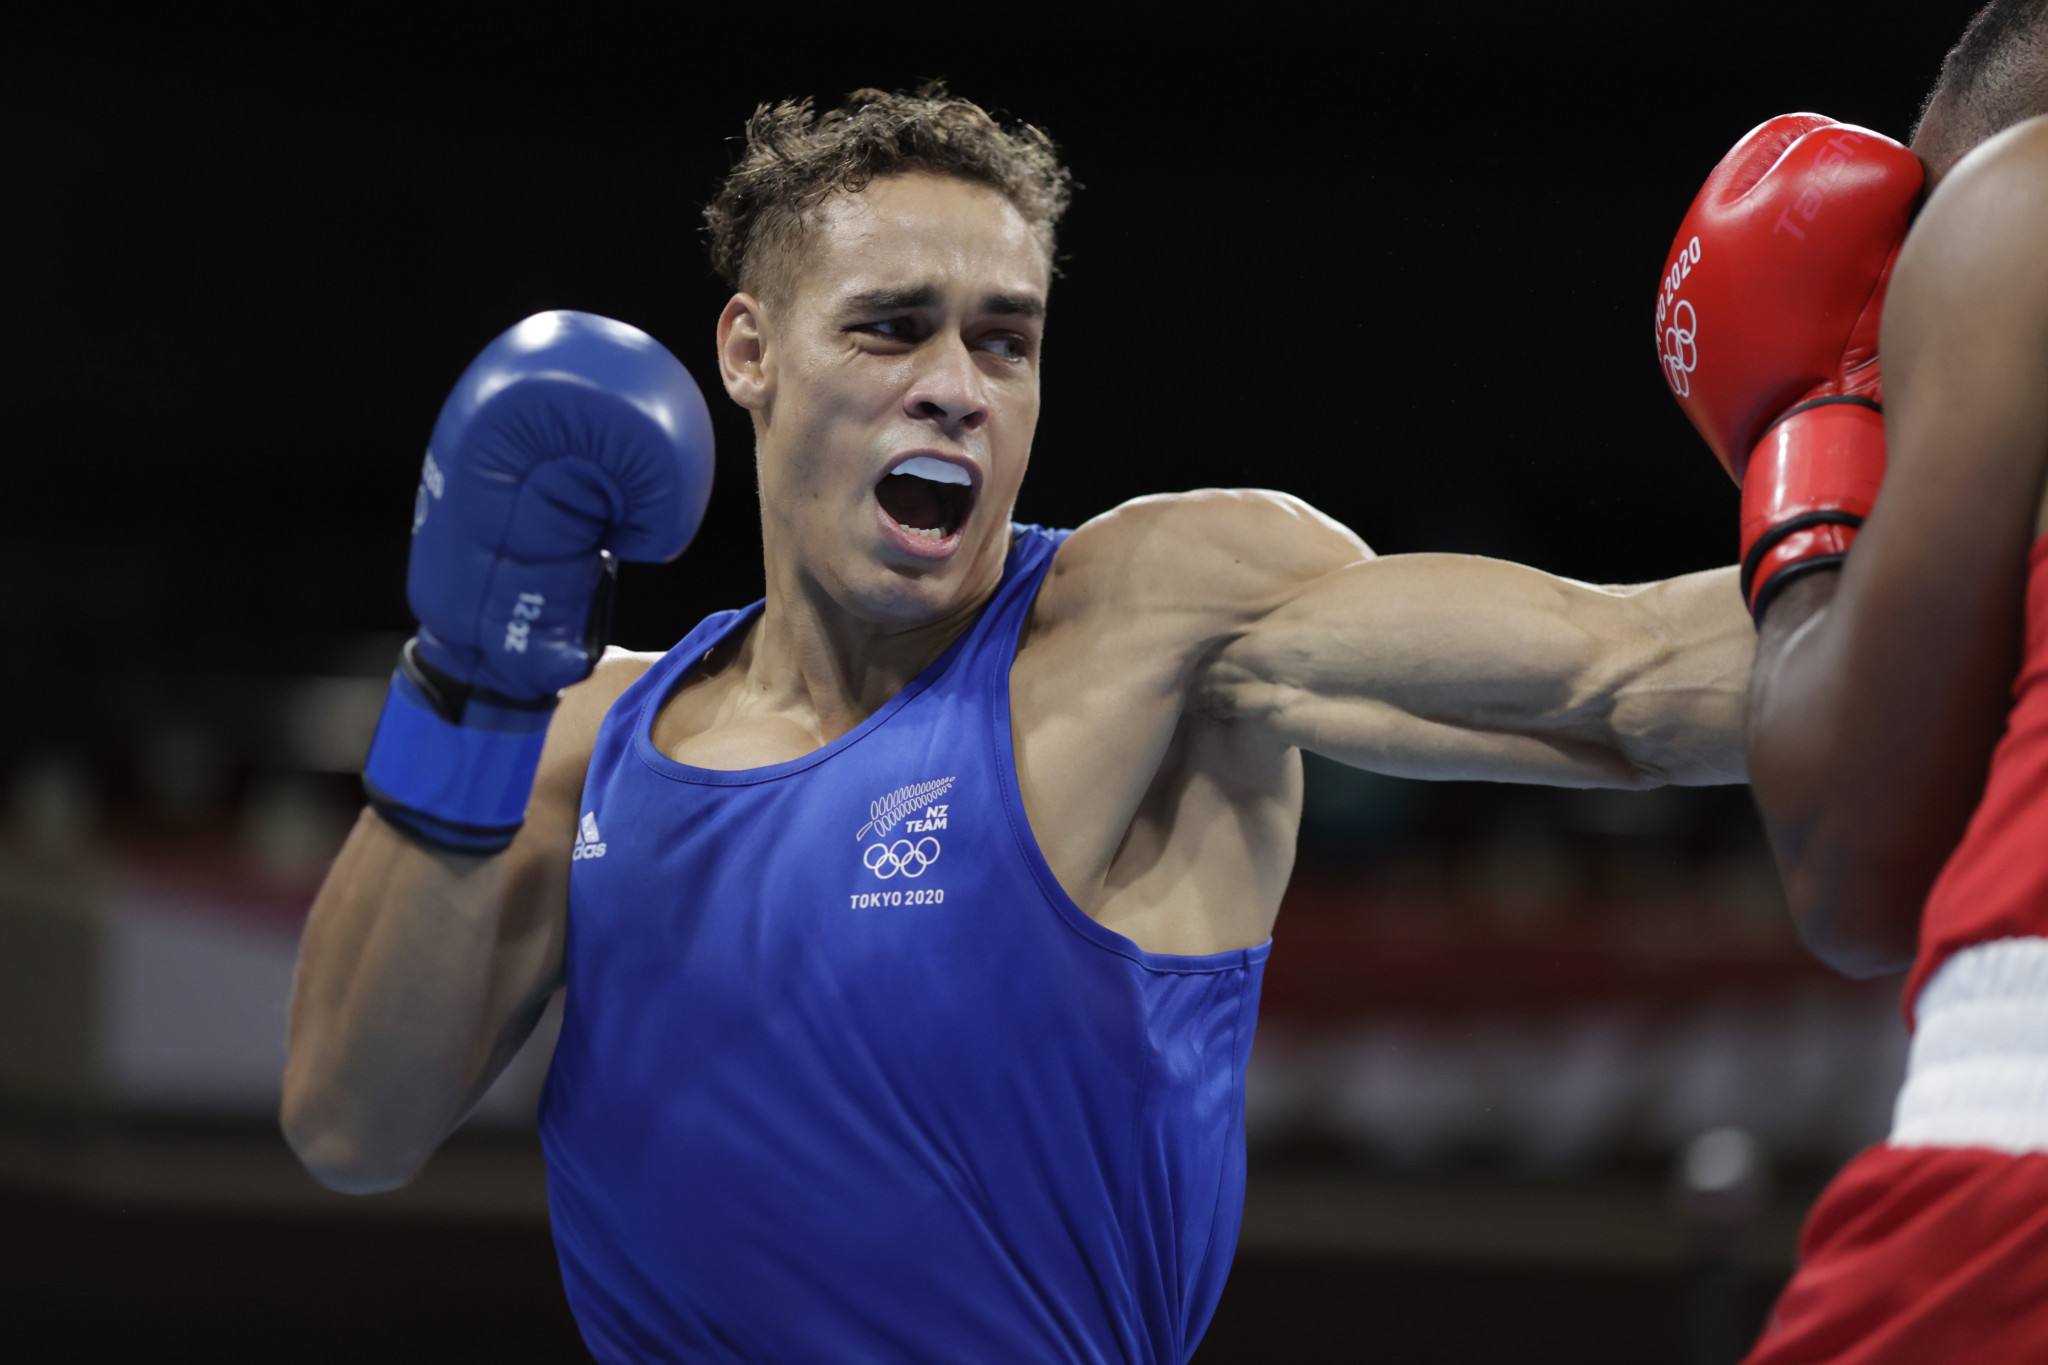 New Zealand is the third nation to withdraw from the IBA to join World Boxing ©Getty Images